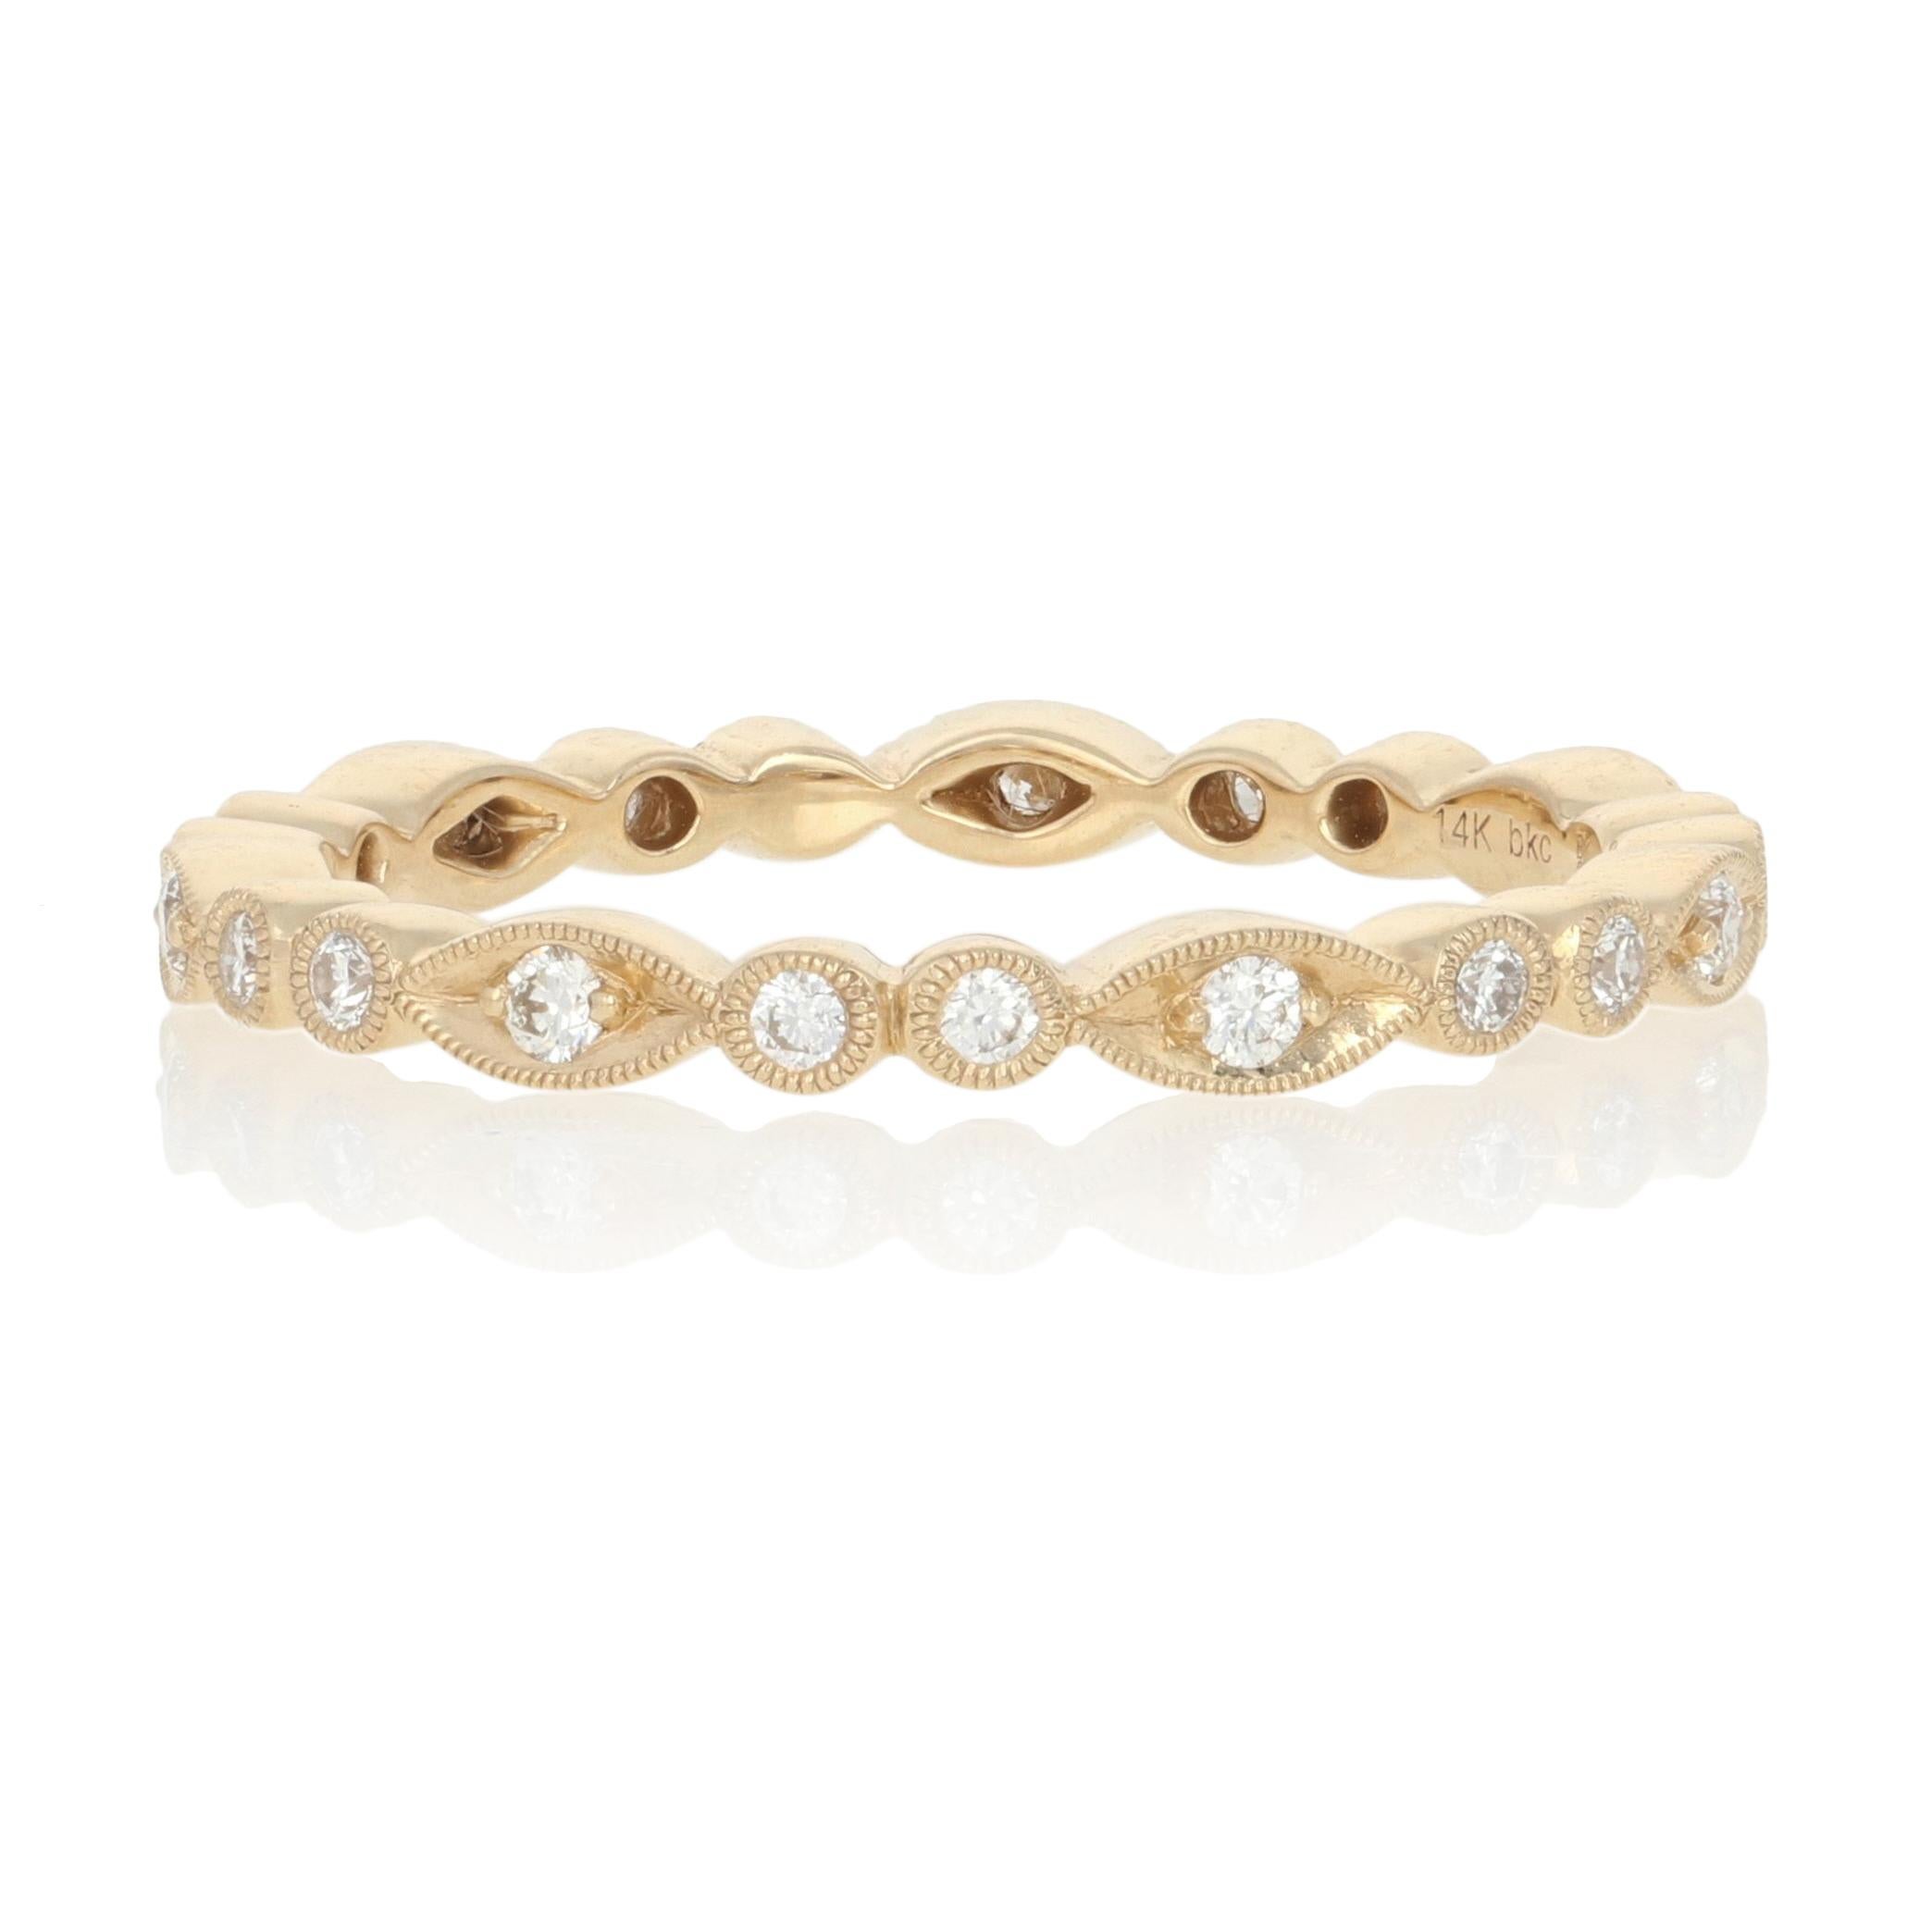 Size: 6 1/2

Brand: Beverly K.

Metal Content: Guaranteed 14k Gold as stamped

Stone Information: 
Natural Diamonds  
Clarity: SI1 
Color: G - H   
Cut: Round Brilliant 
Total Carats: 0.24ctw

Style: Eternity Band 
Face Height (north to south):